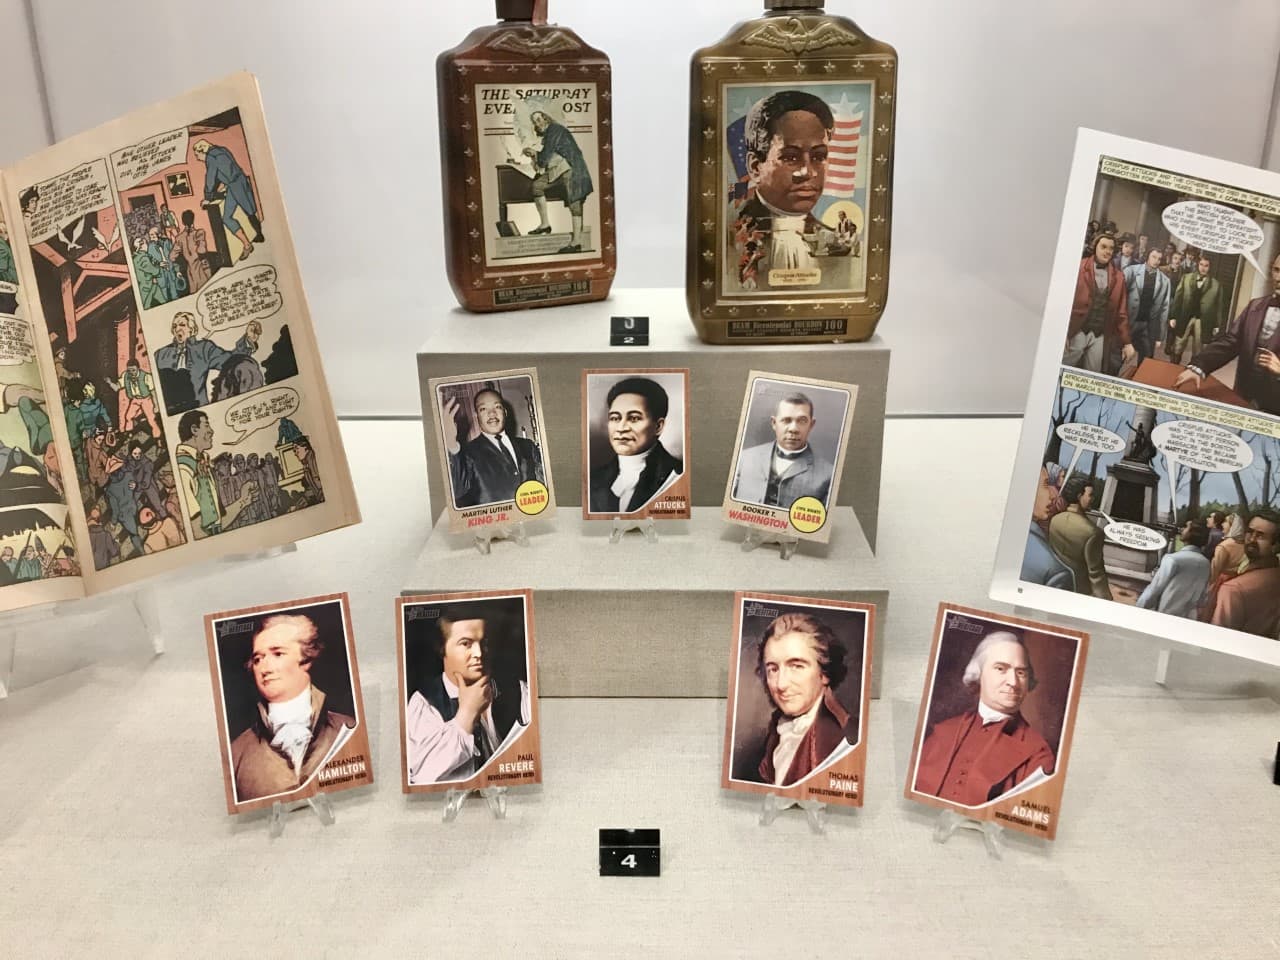 &quot;Reflecting Attucks&quot; puts Crispus Attucks into perspective alongside other Founding Fathers of the American Revolution and then looks at how his legacy has been used for social and racial justice efforts in America. (Courtesy Revolutionary Spaces)